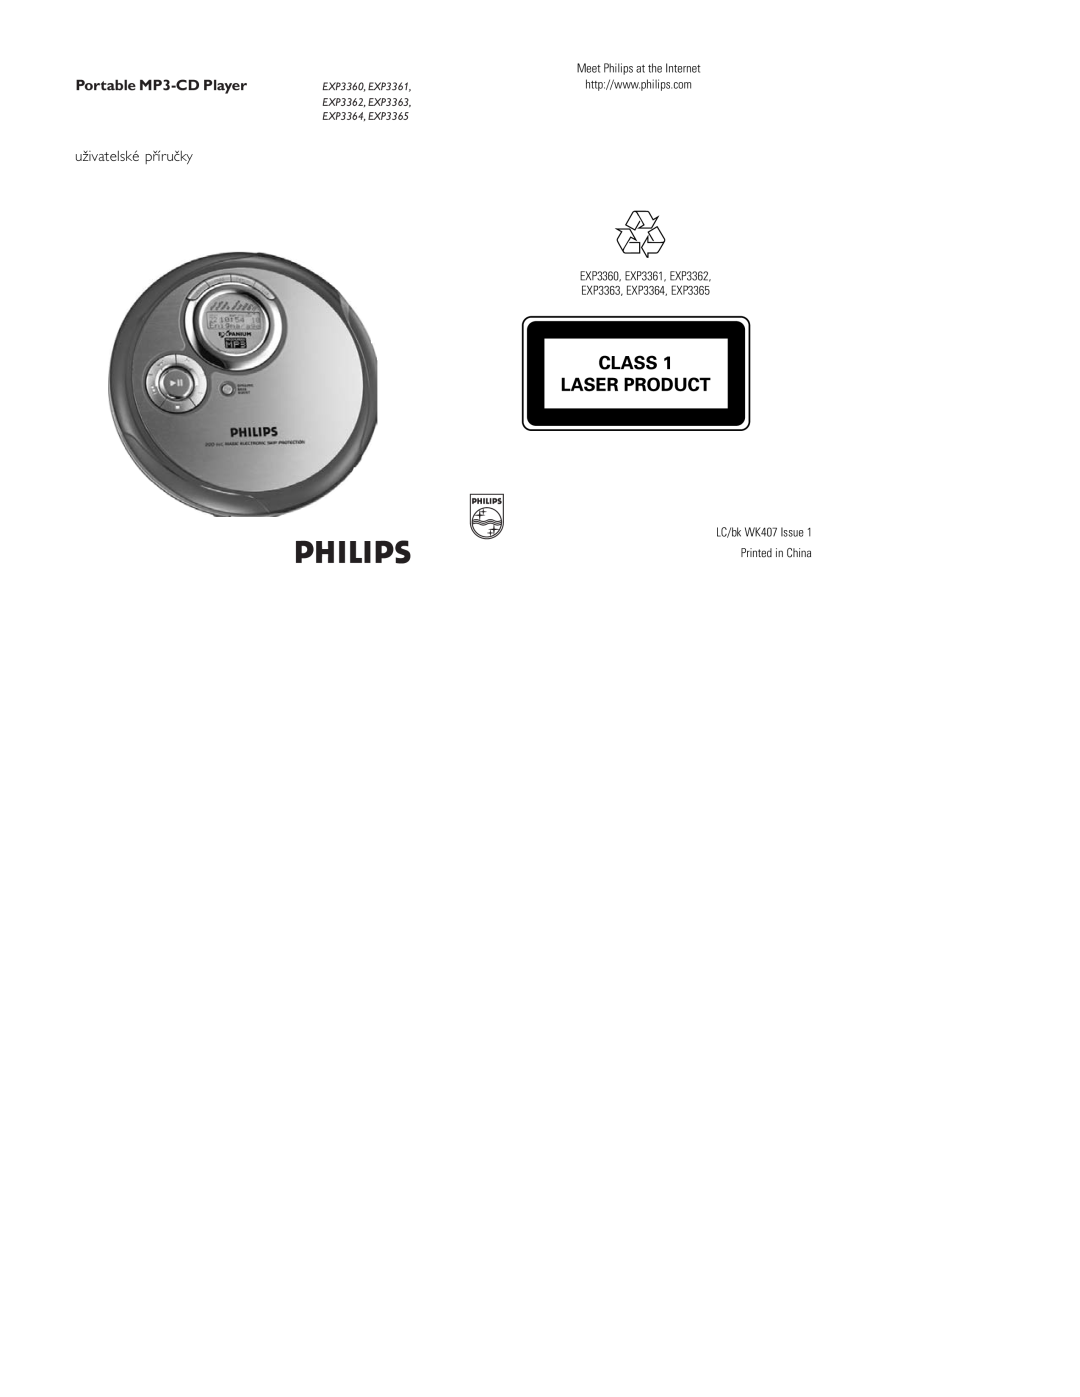 Philips user manual Portable MP3-CDPlayer, EXP3360, EXP3361, EXP3362, EXP3363, EXP3364, EXP3365 